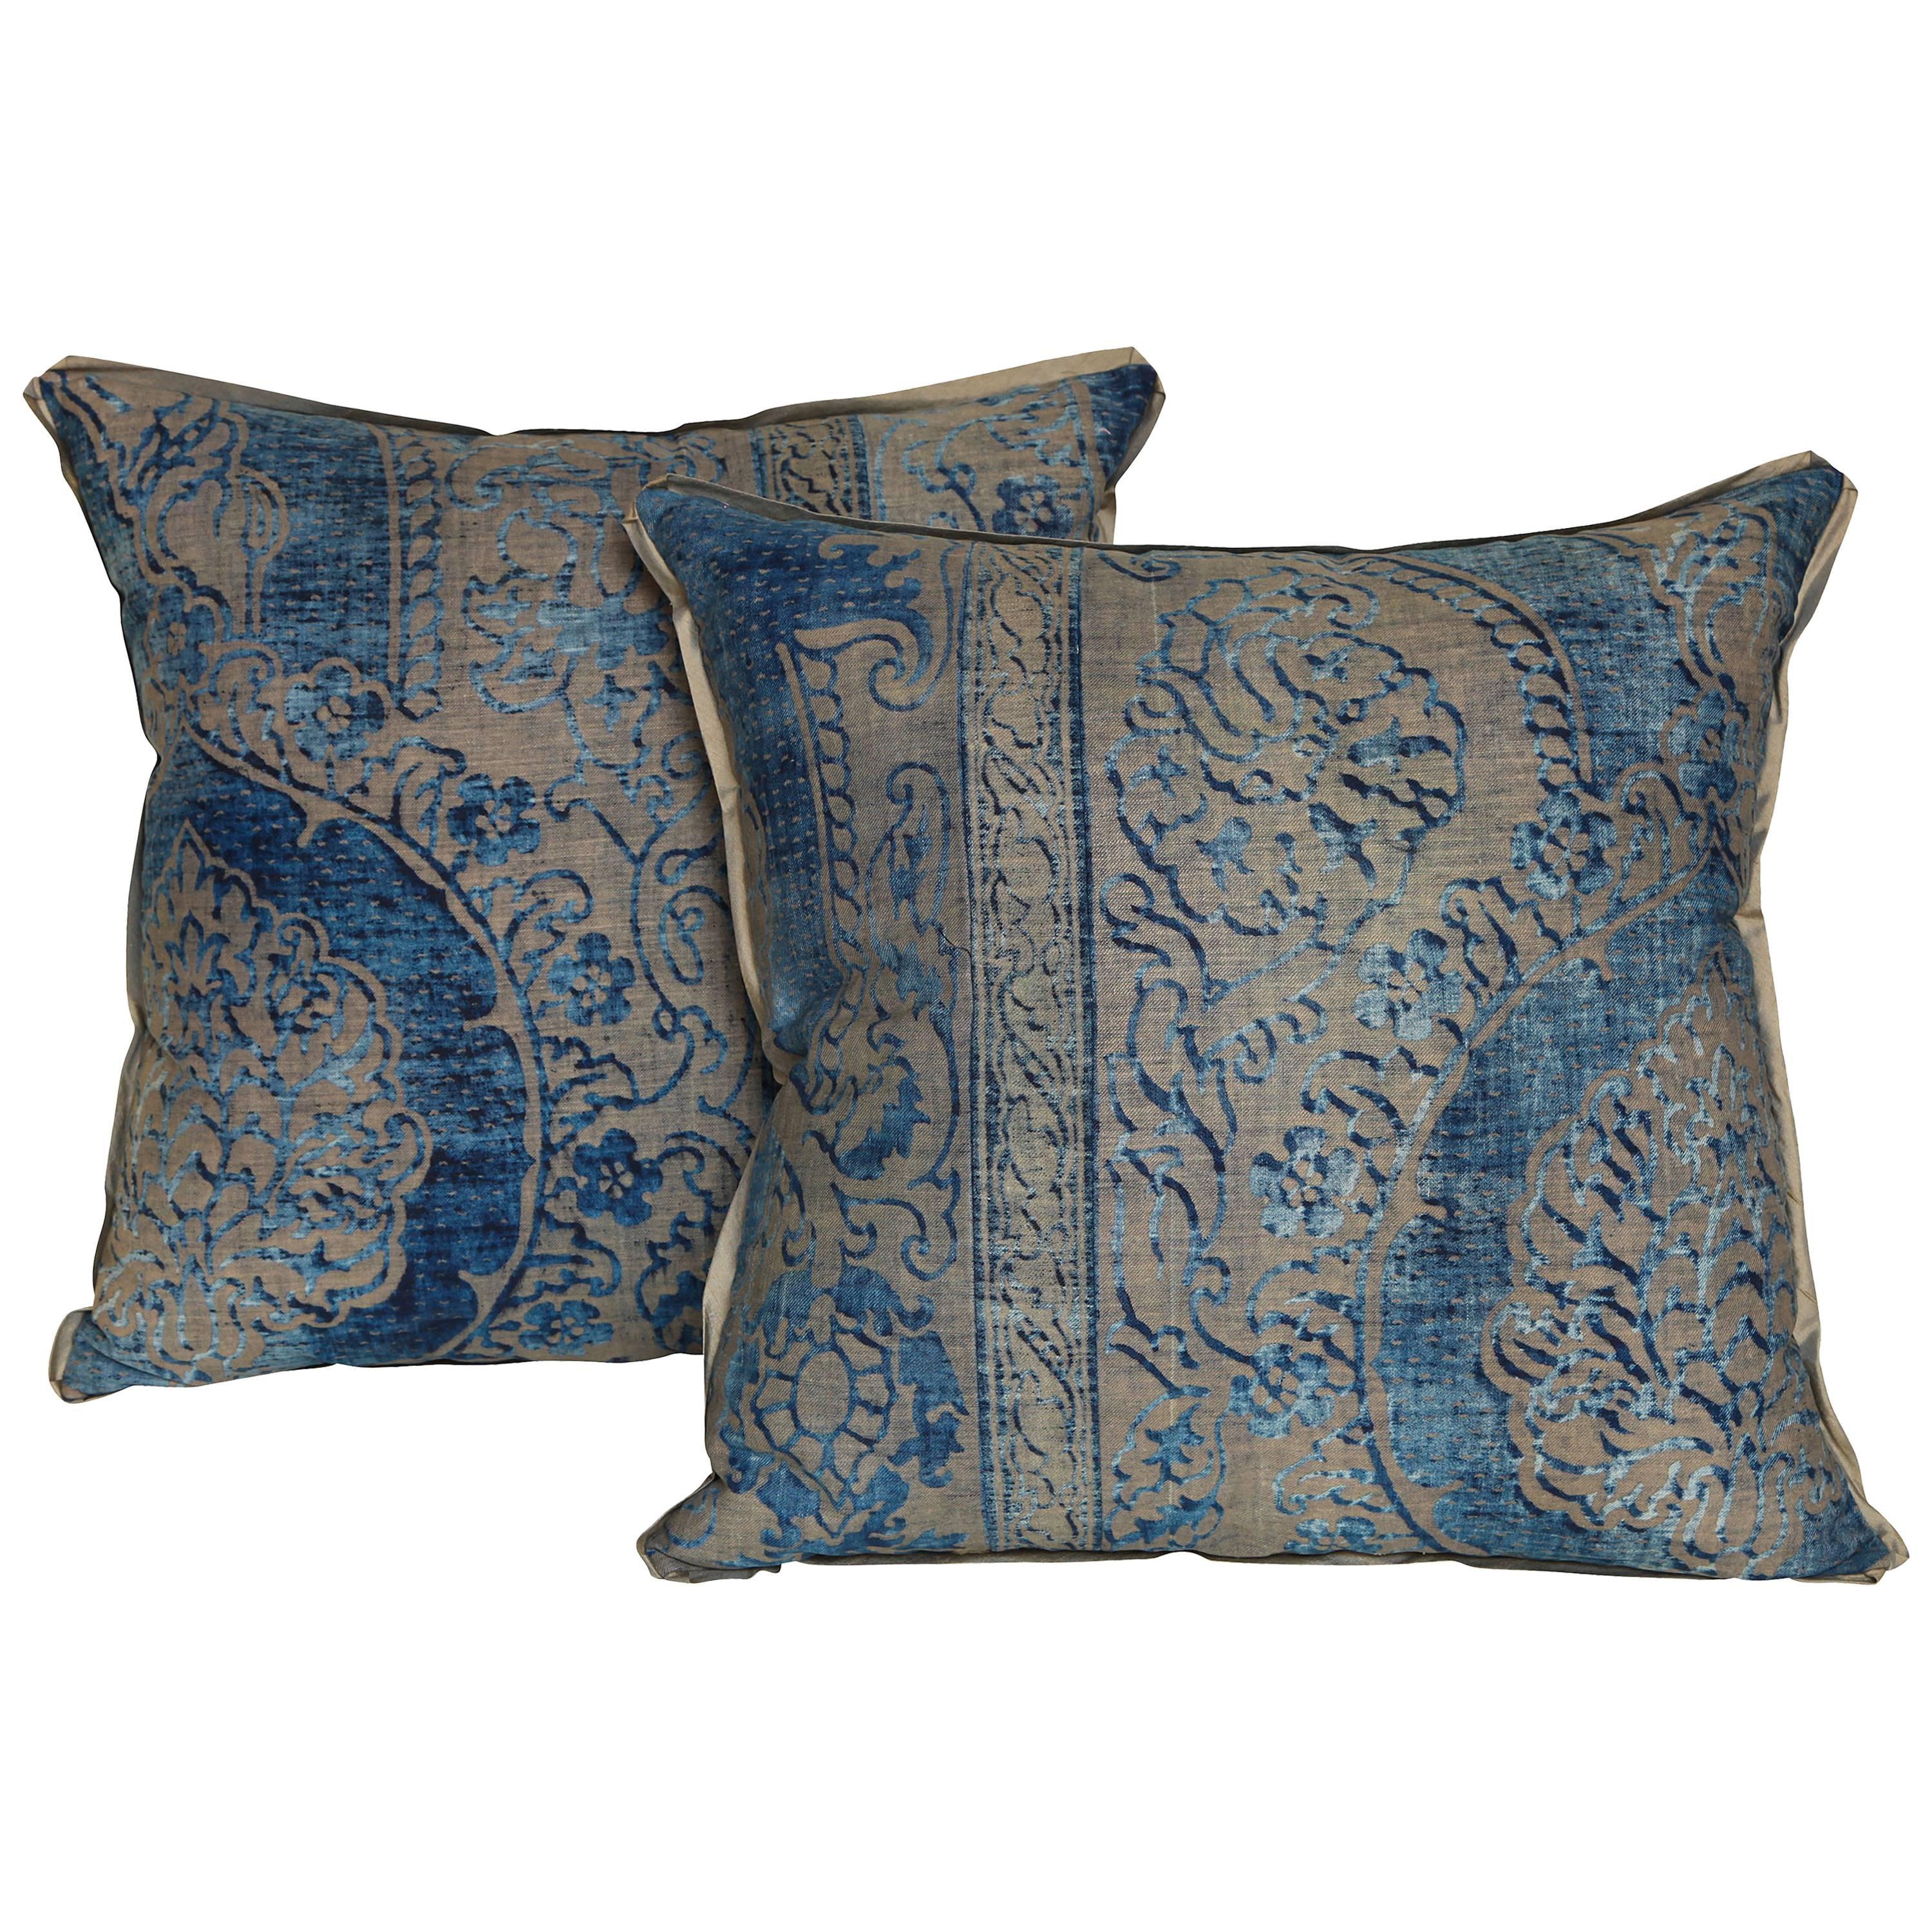 Pair of Fortuny Fabric Cushions in the Nicolo Pattern